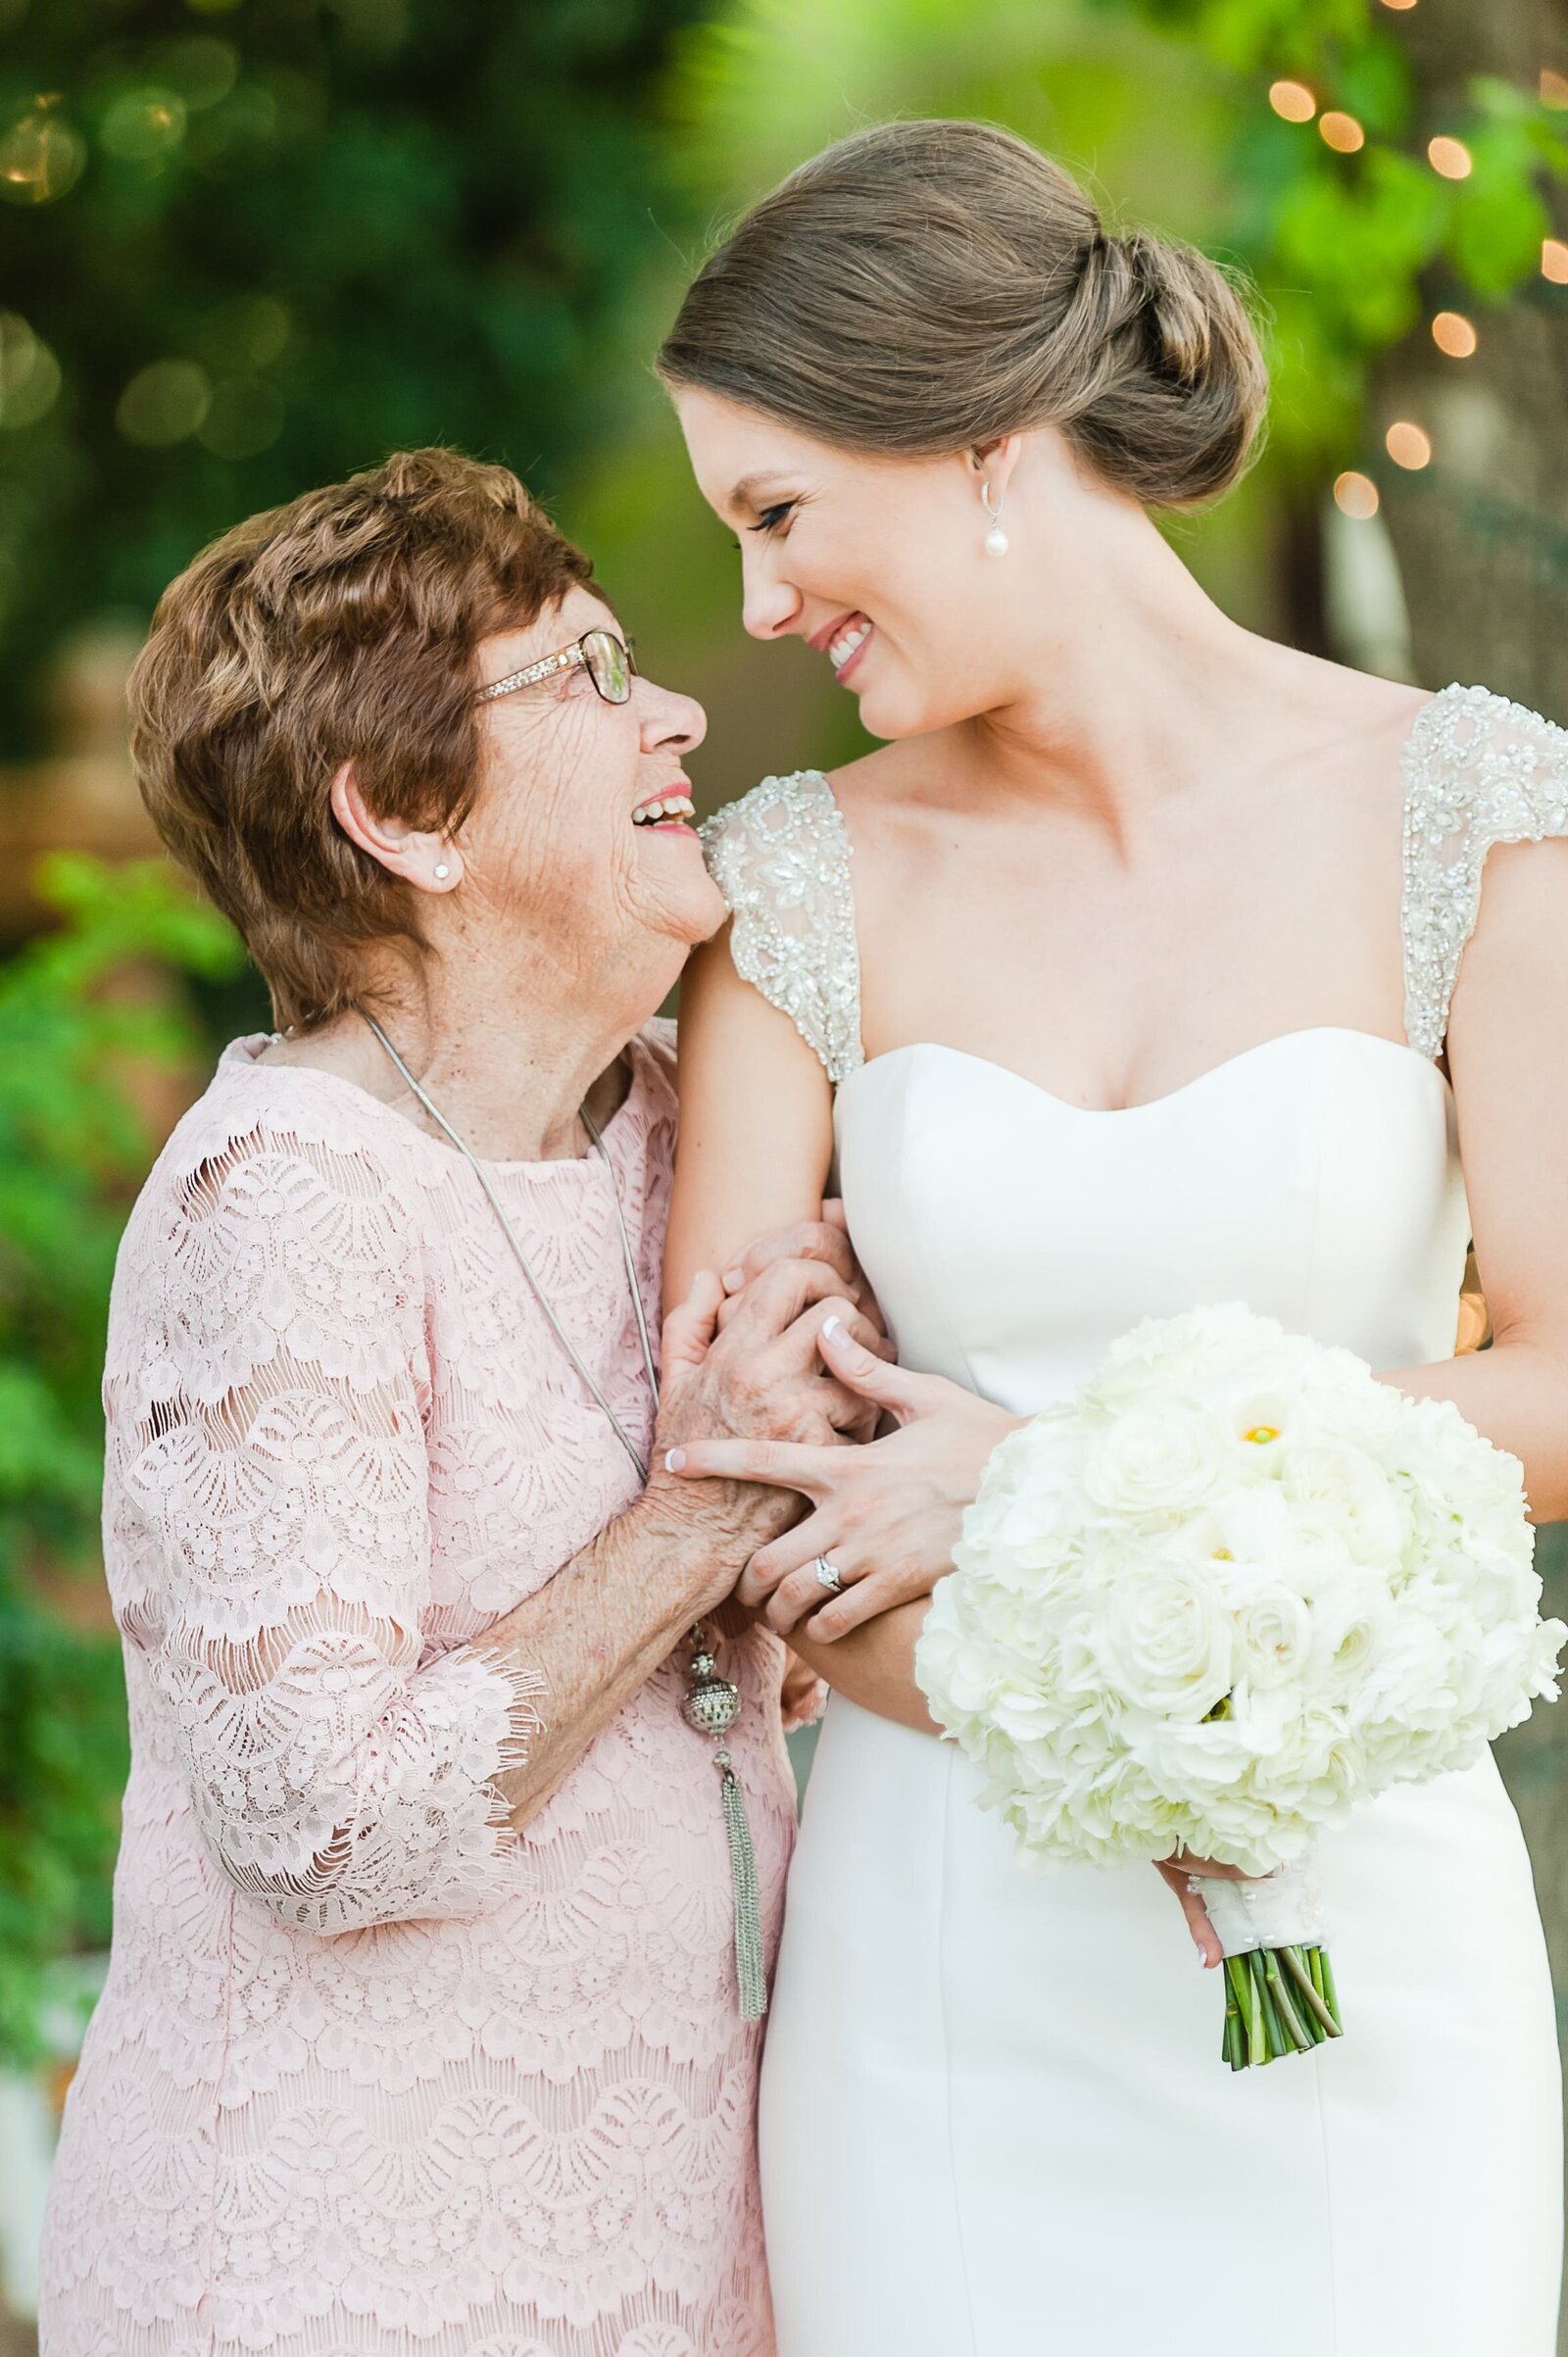 A sweet moment between the bride and her grandma.